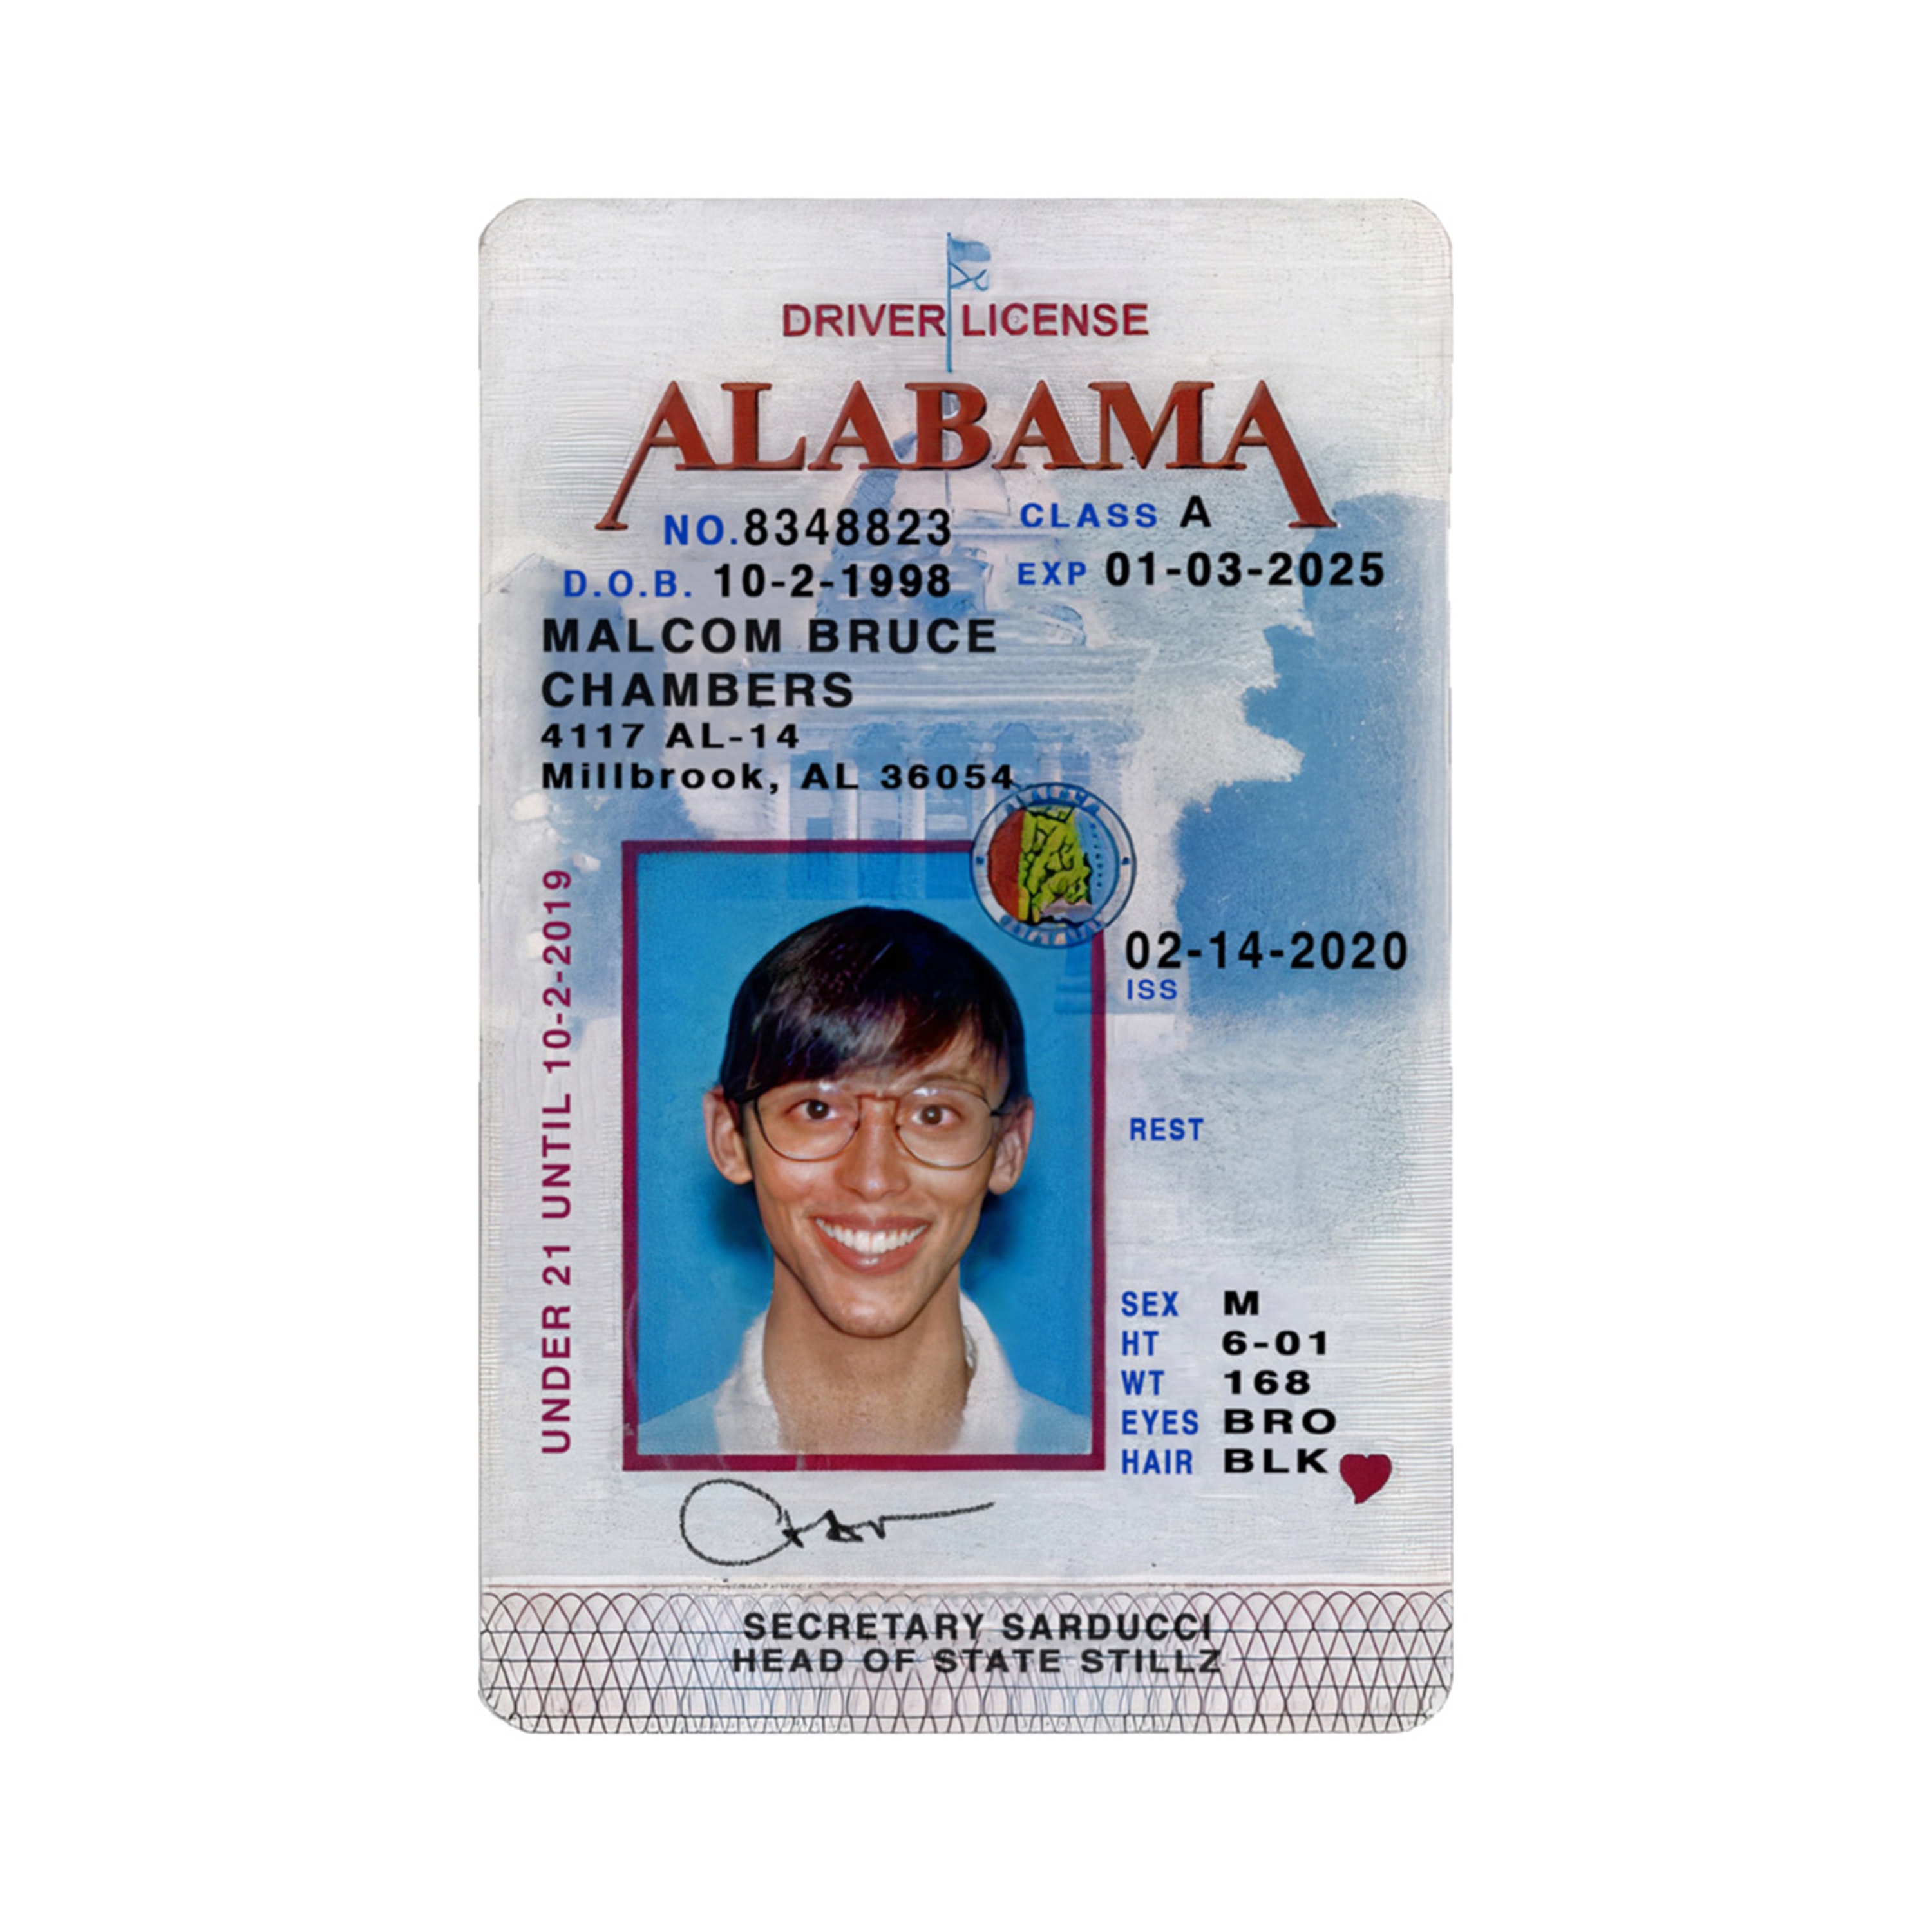 How Much Is A Alabama Fake Id